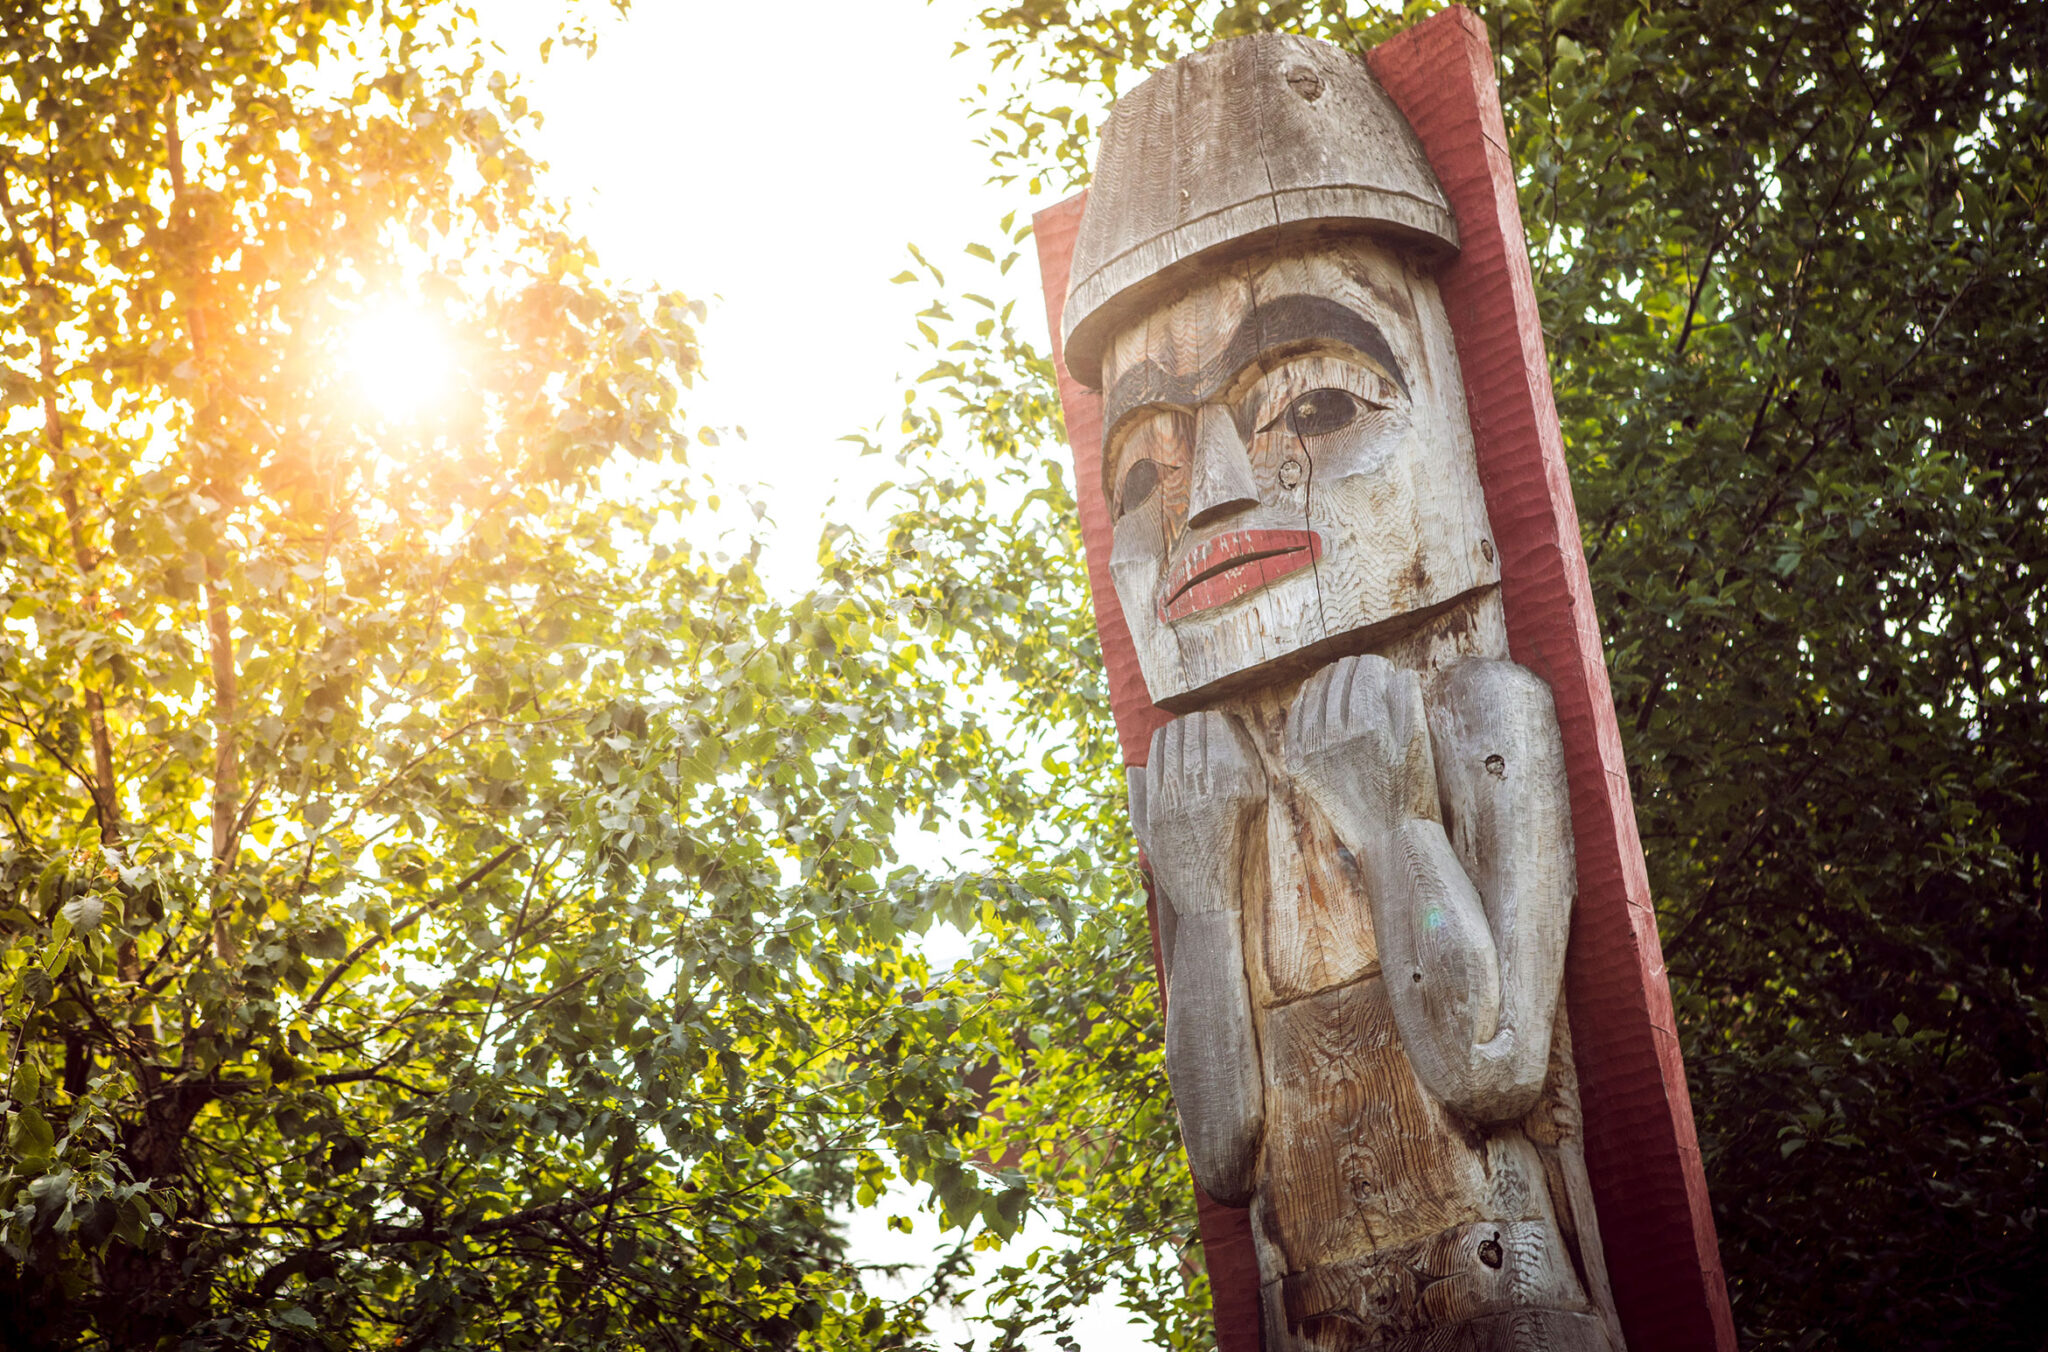 A photo of the Welcome Pole at the front entrance of the Squamish Lil'wat Cultural Centre in Whistler.